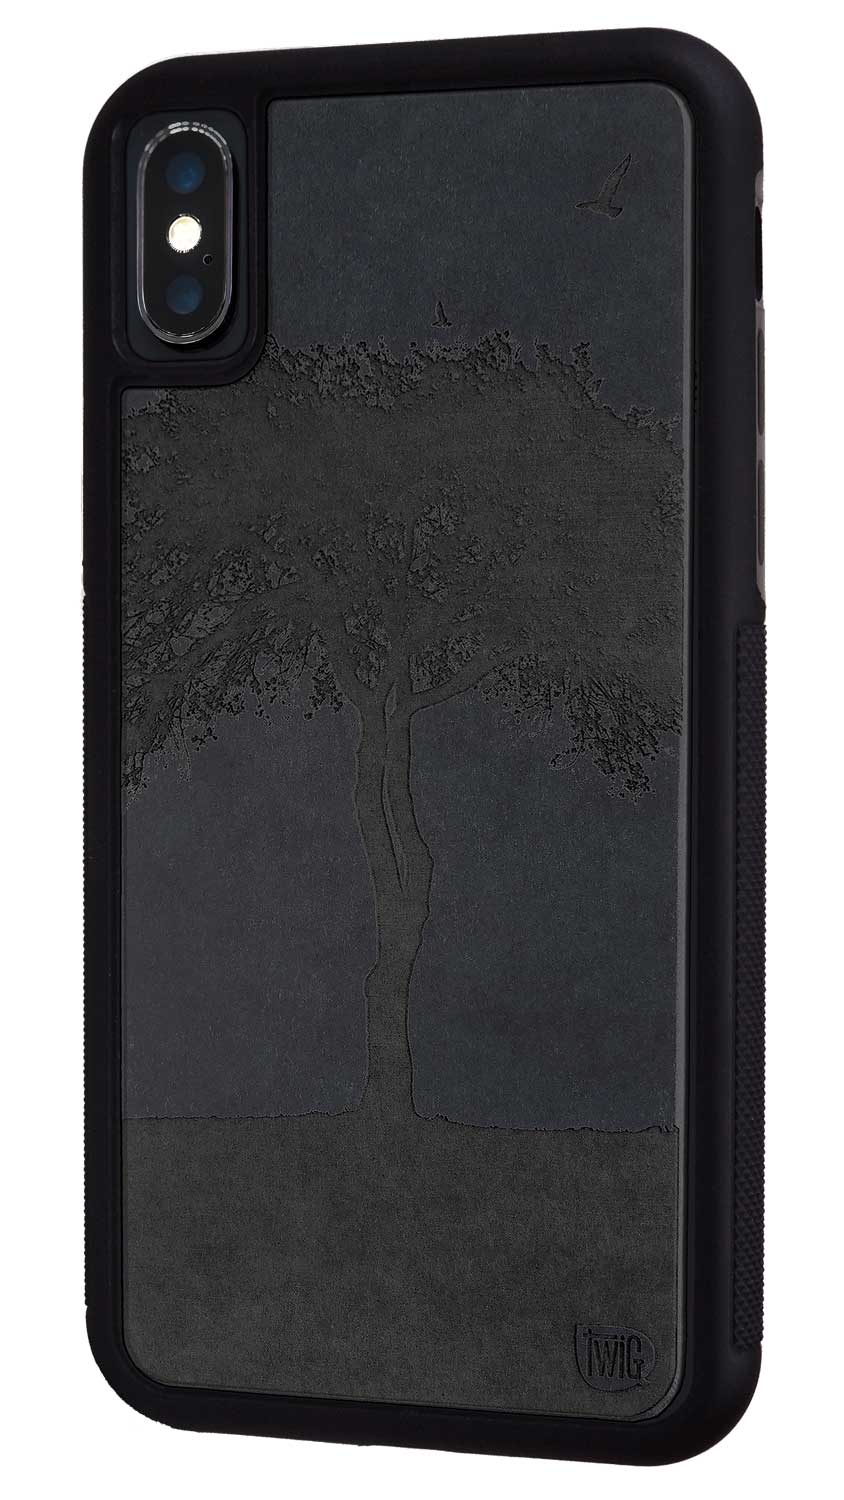 The One Tree - Color Paper iPhone Case, iPhone Case - Twig Case Co.